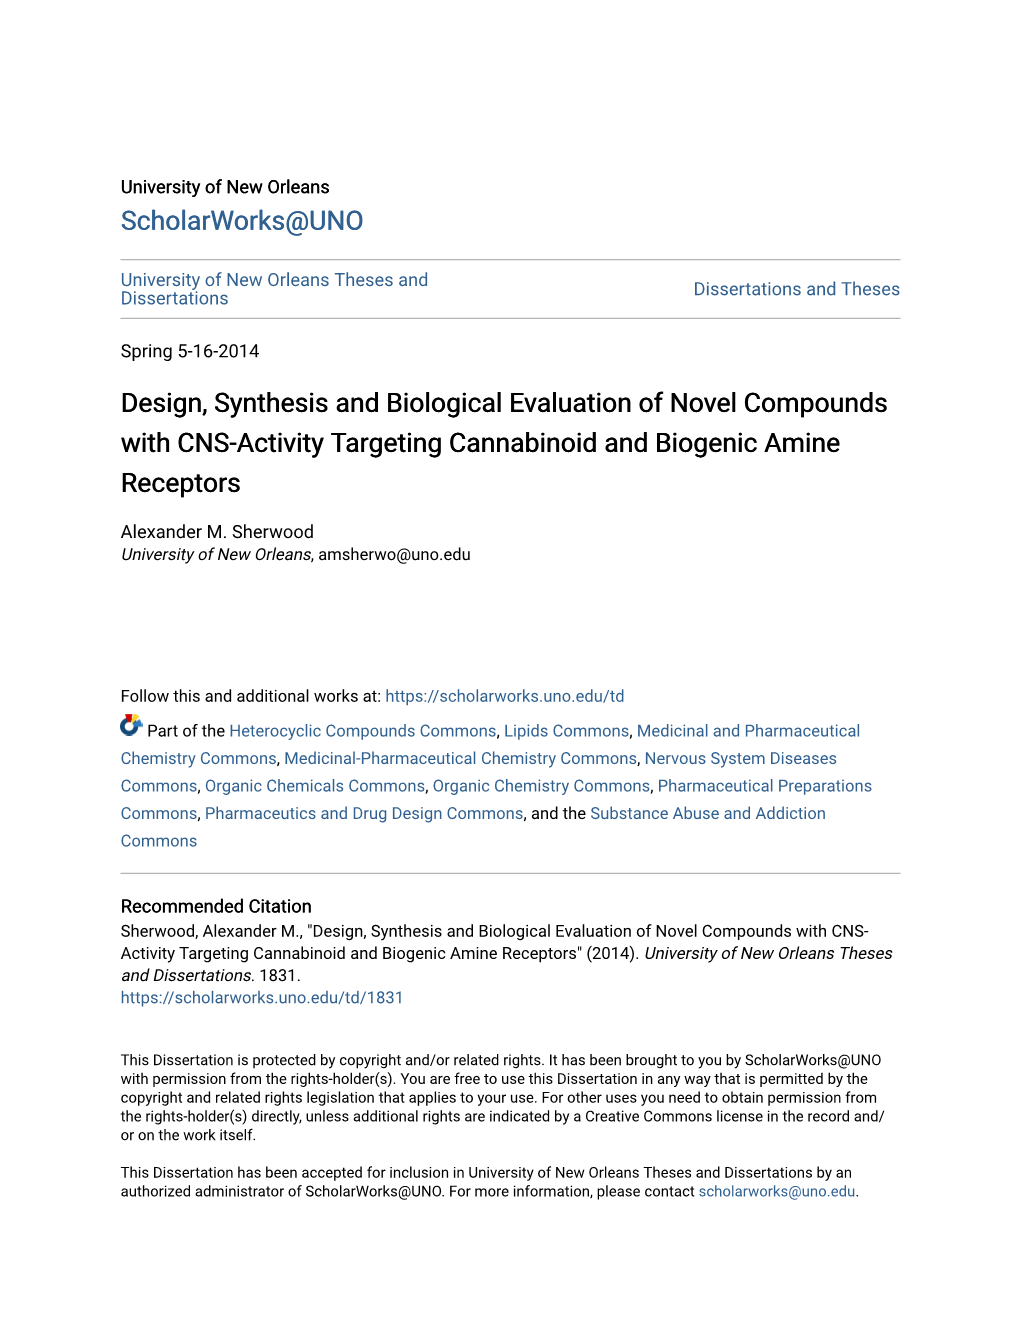 Design, Synthesis and Biological Evaluation of Novel Compounds with CNS-Activity Targeting Cannabinoid and Biogenic Amine Receptors